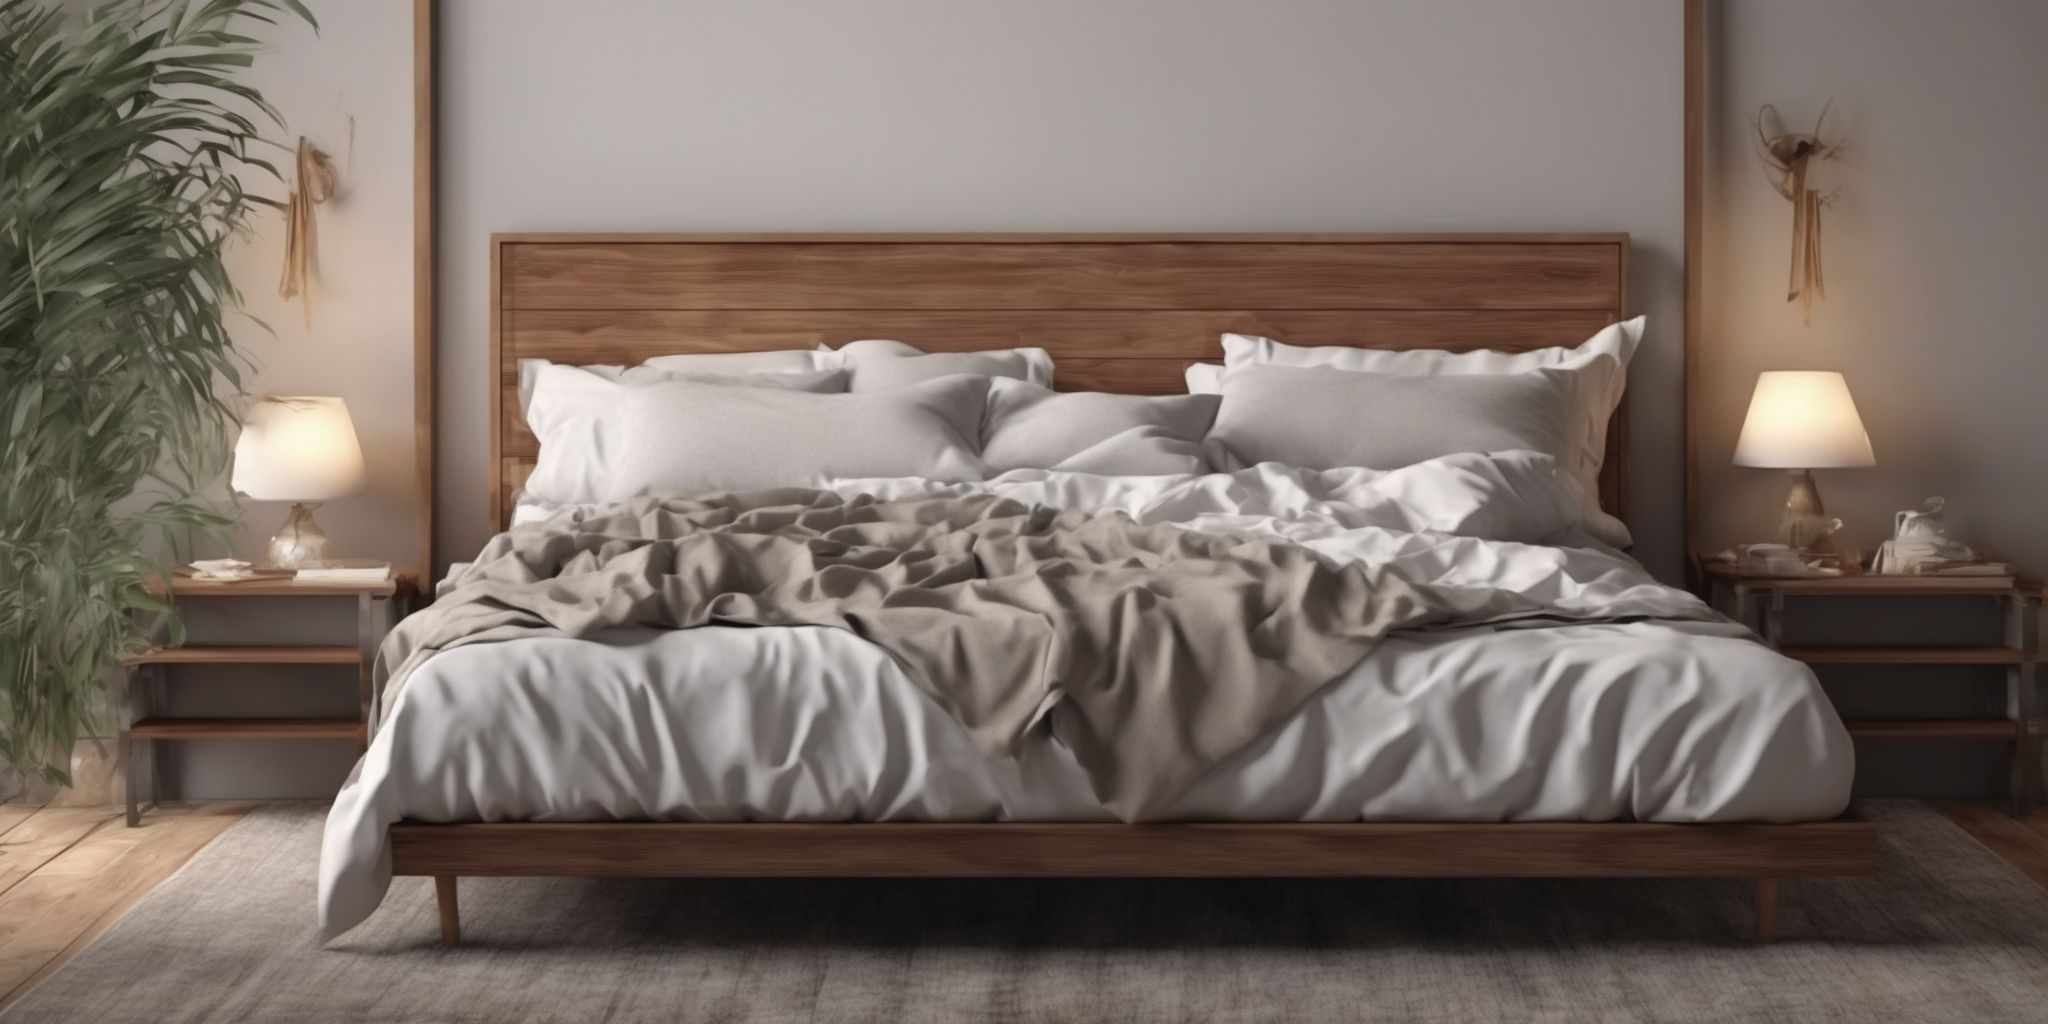 Bed  in realistic, photographic style